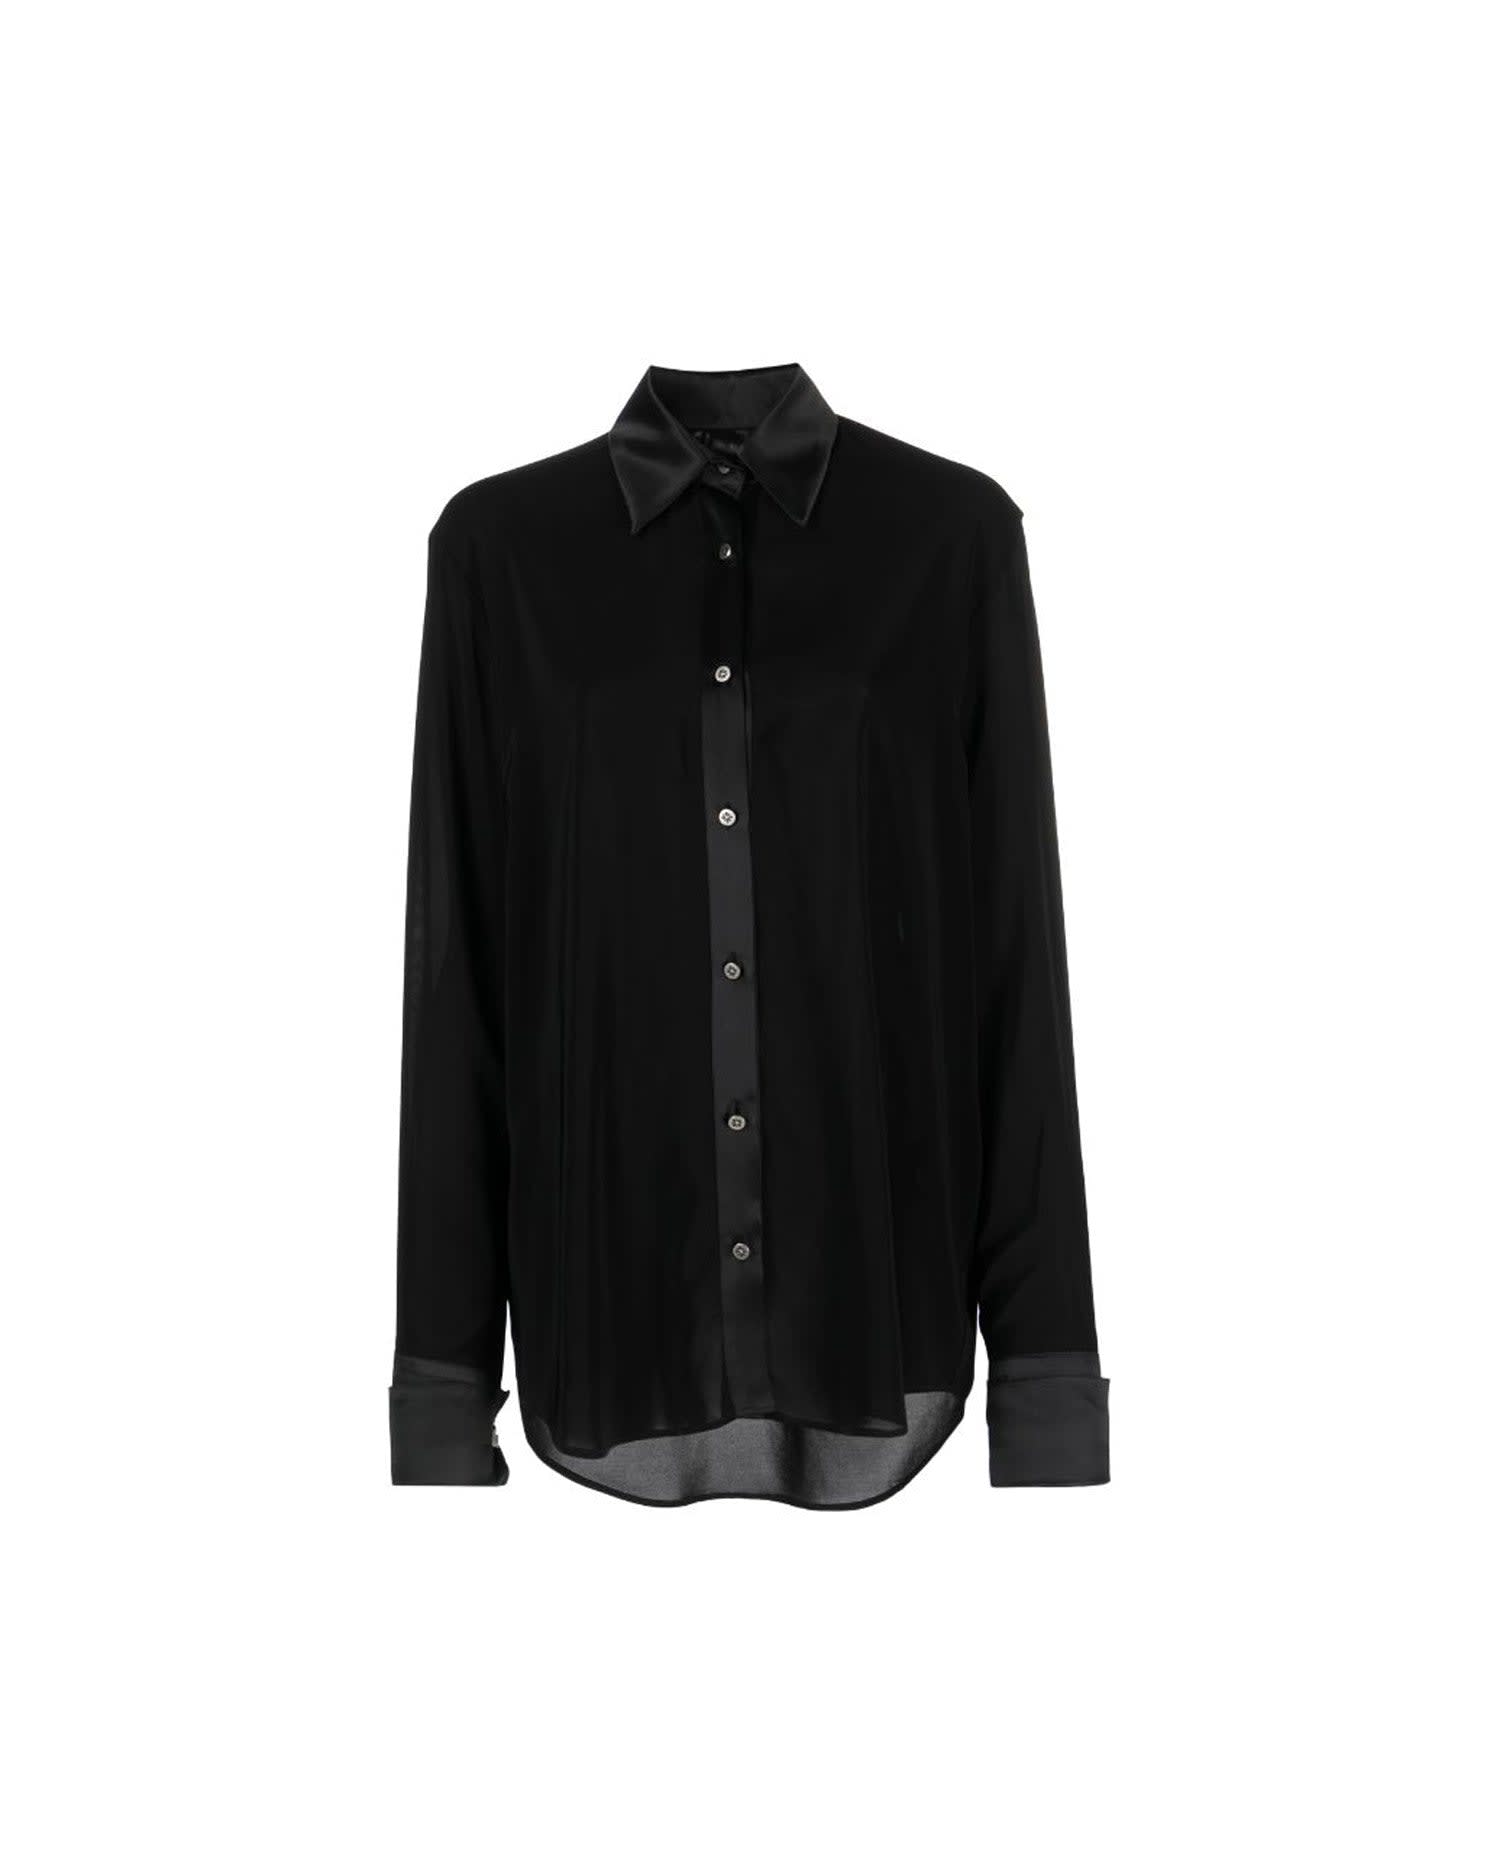 Shirt With Contrasting Fabrics And Wide Long Sleeves. Frontalt Fastener By Buttons.